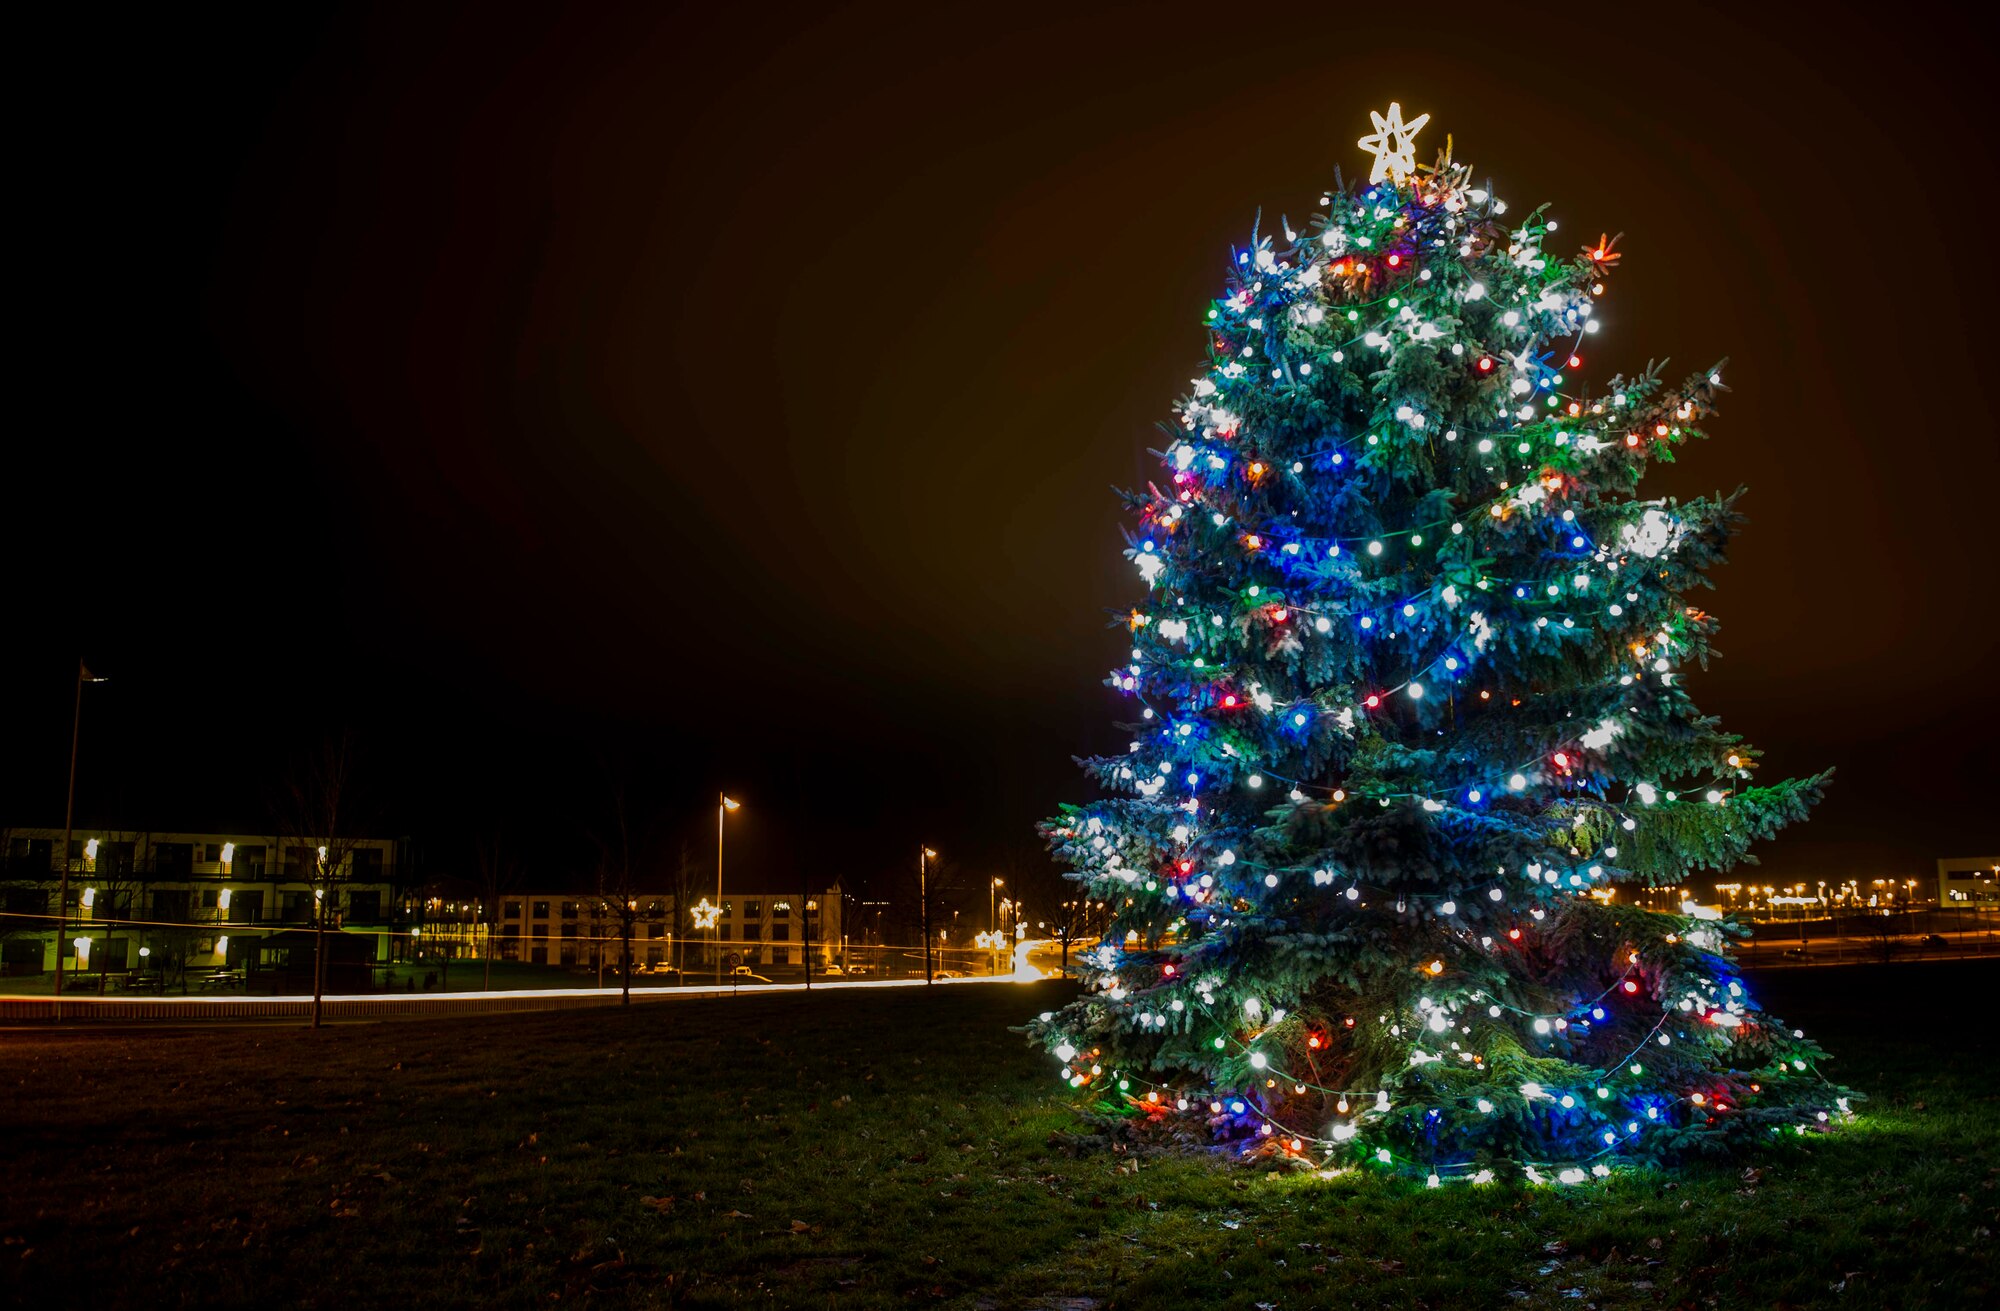 The Holiday Tree holds decorative lights after the annual tree-lighting ceremony at the Bowling Alley at Spangdahlem Air Base, Germany, Dec. 10, 2015. Participating community members observed several performances and carols, watched the tree-lighting ceremony, had an audience with Santa Claus and had free hot chocolate and cookies. (U.S. Air Force photo by Airman 1st Class Timothy Kim/Released)